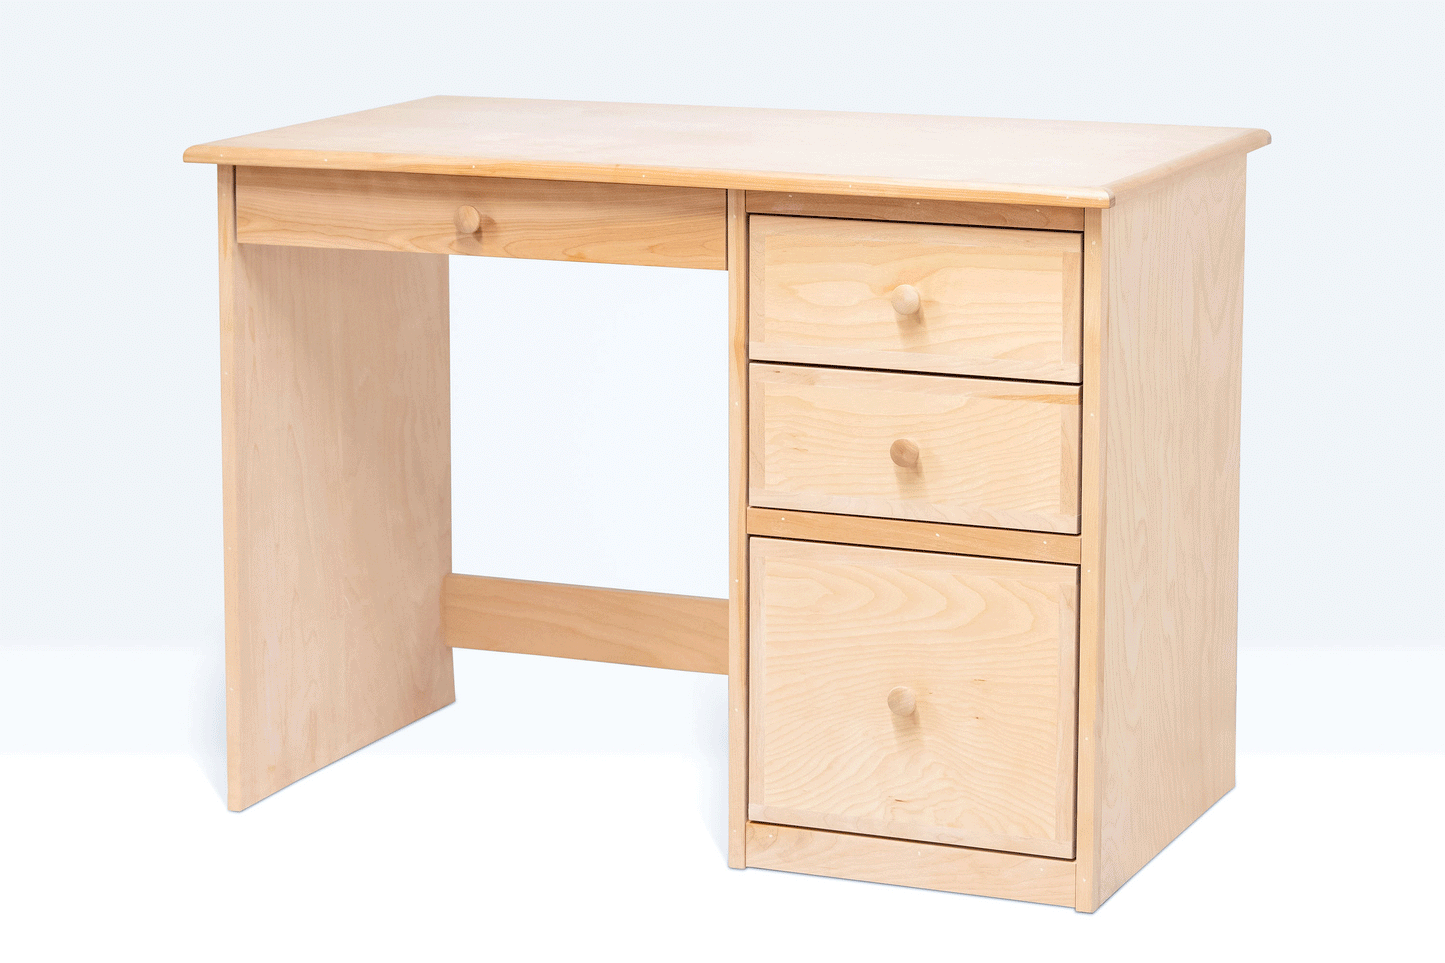 Berkshire Student Desk with Drawers shown with Drawers open to highlight storage space.